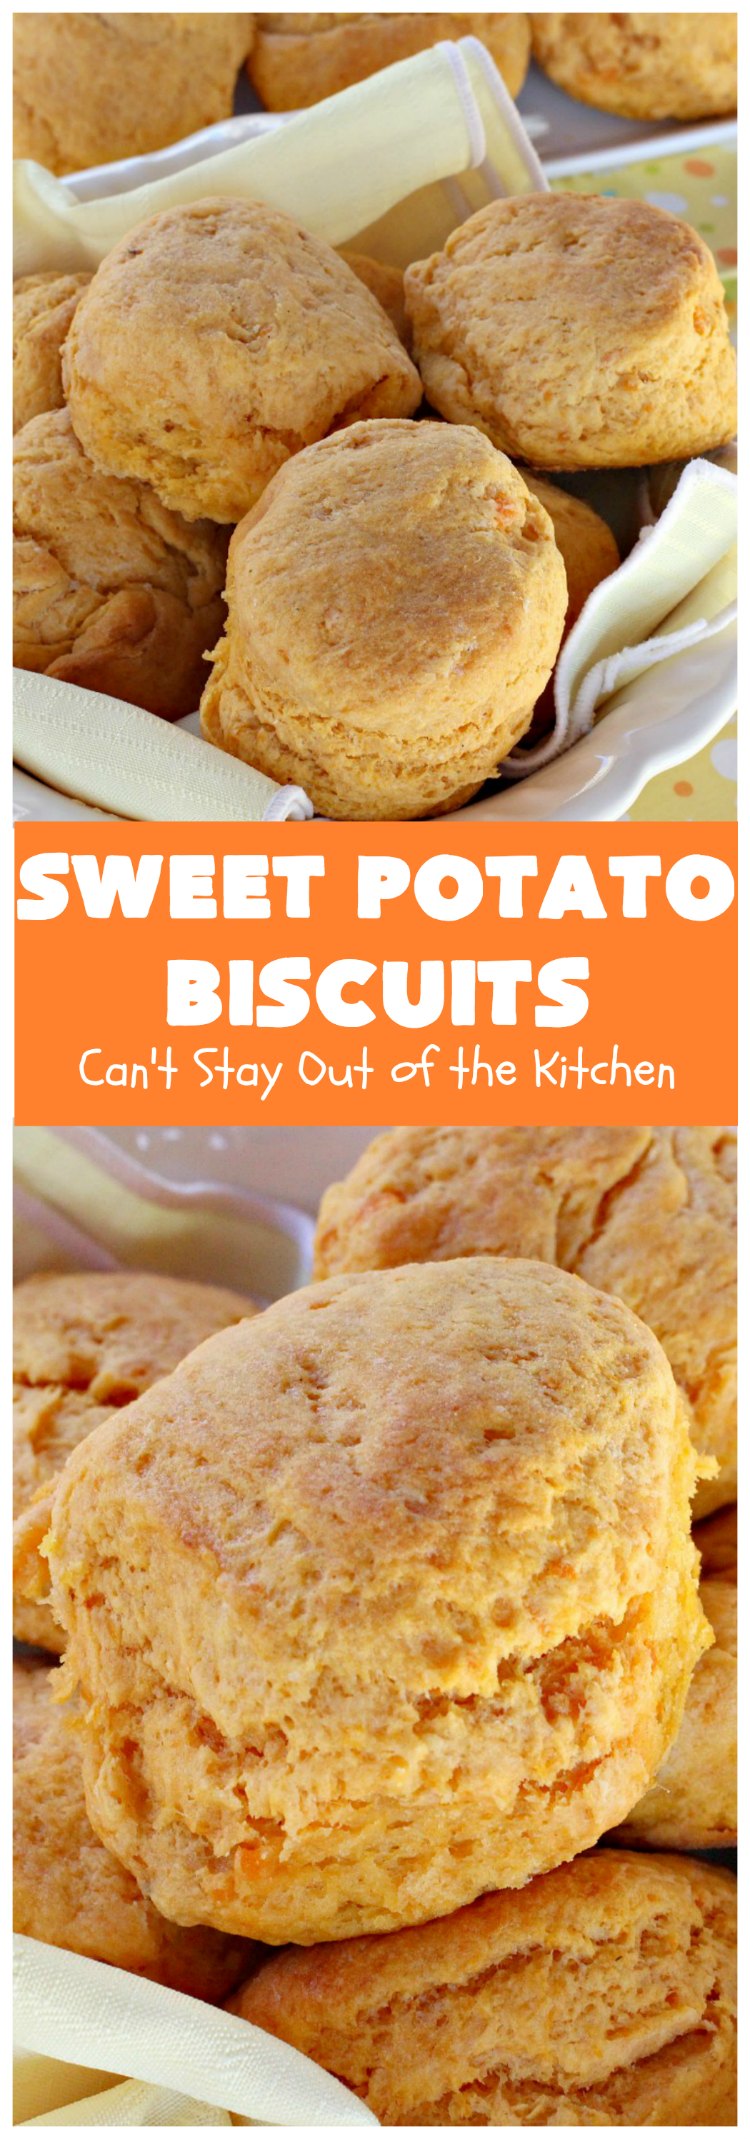 Sweet Potato Biscuits | Can't Stay Out of the Kitchen